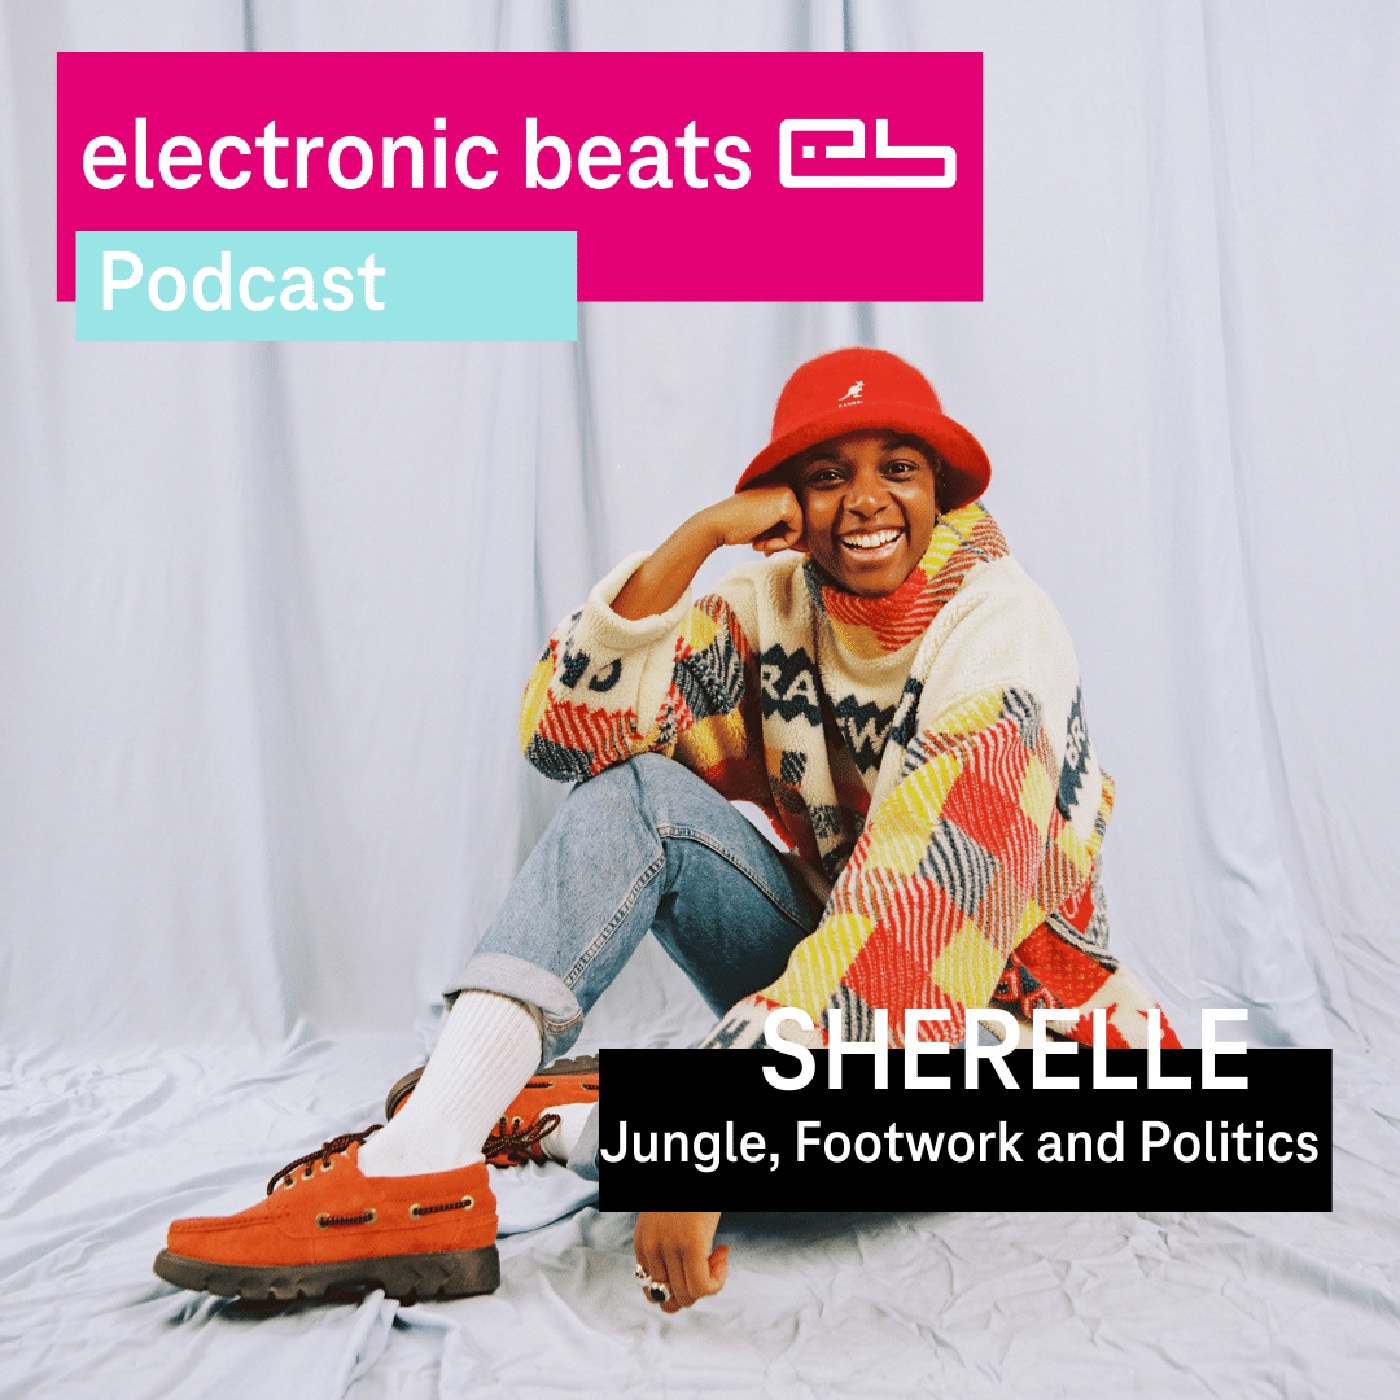 SHERELLE- Jungle, Footwork and Politics